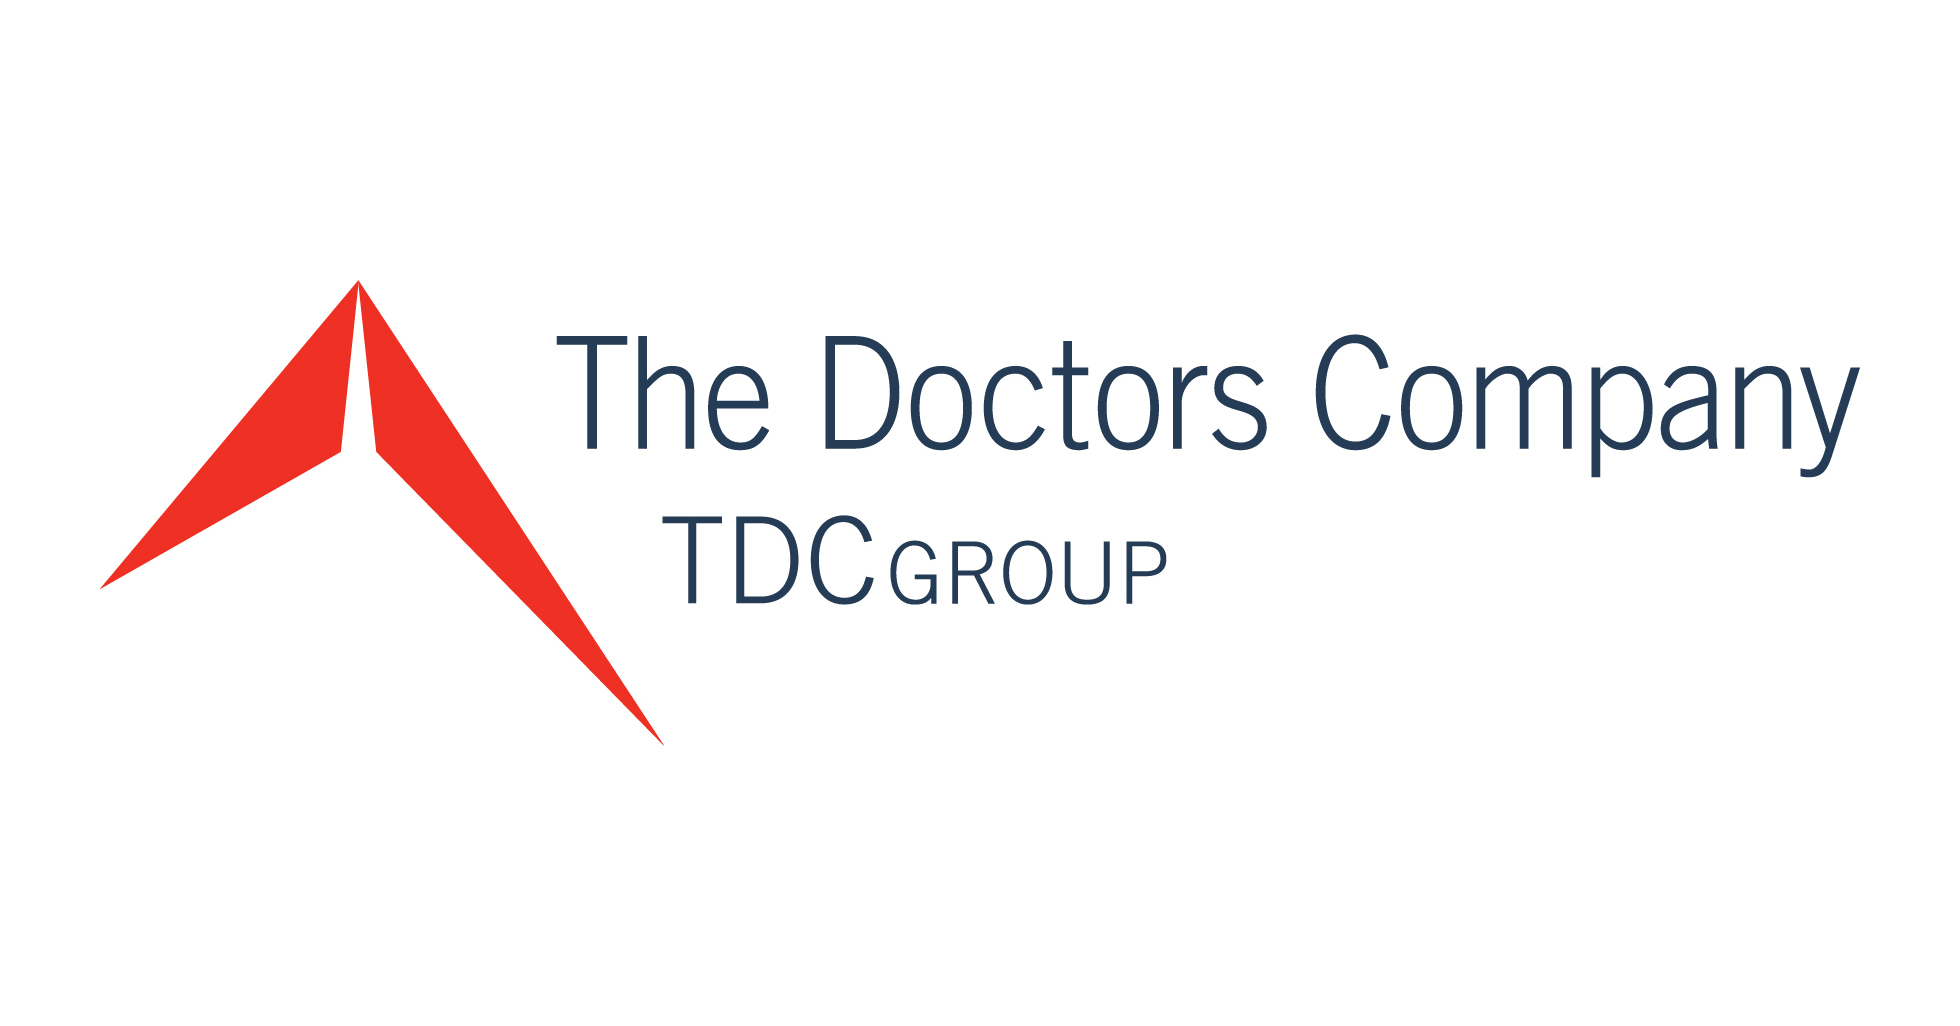 Dr company. TDC Group the Doctors Company. TDC Group the Doctors Company logo.